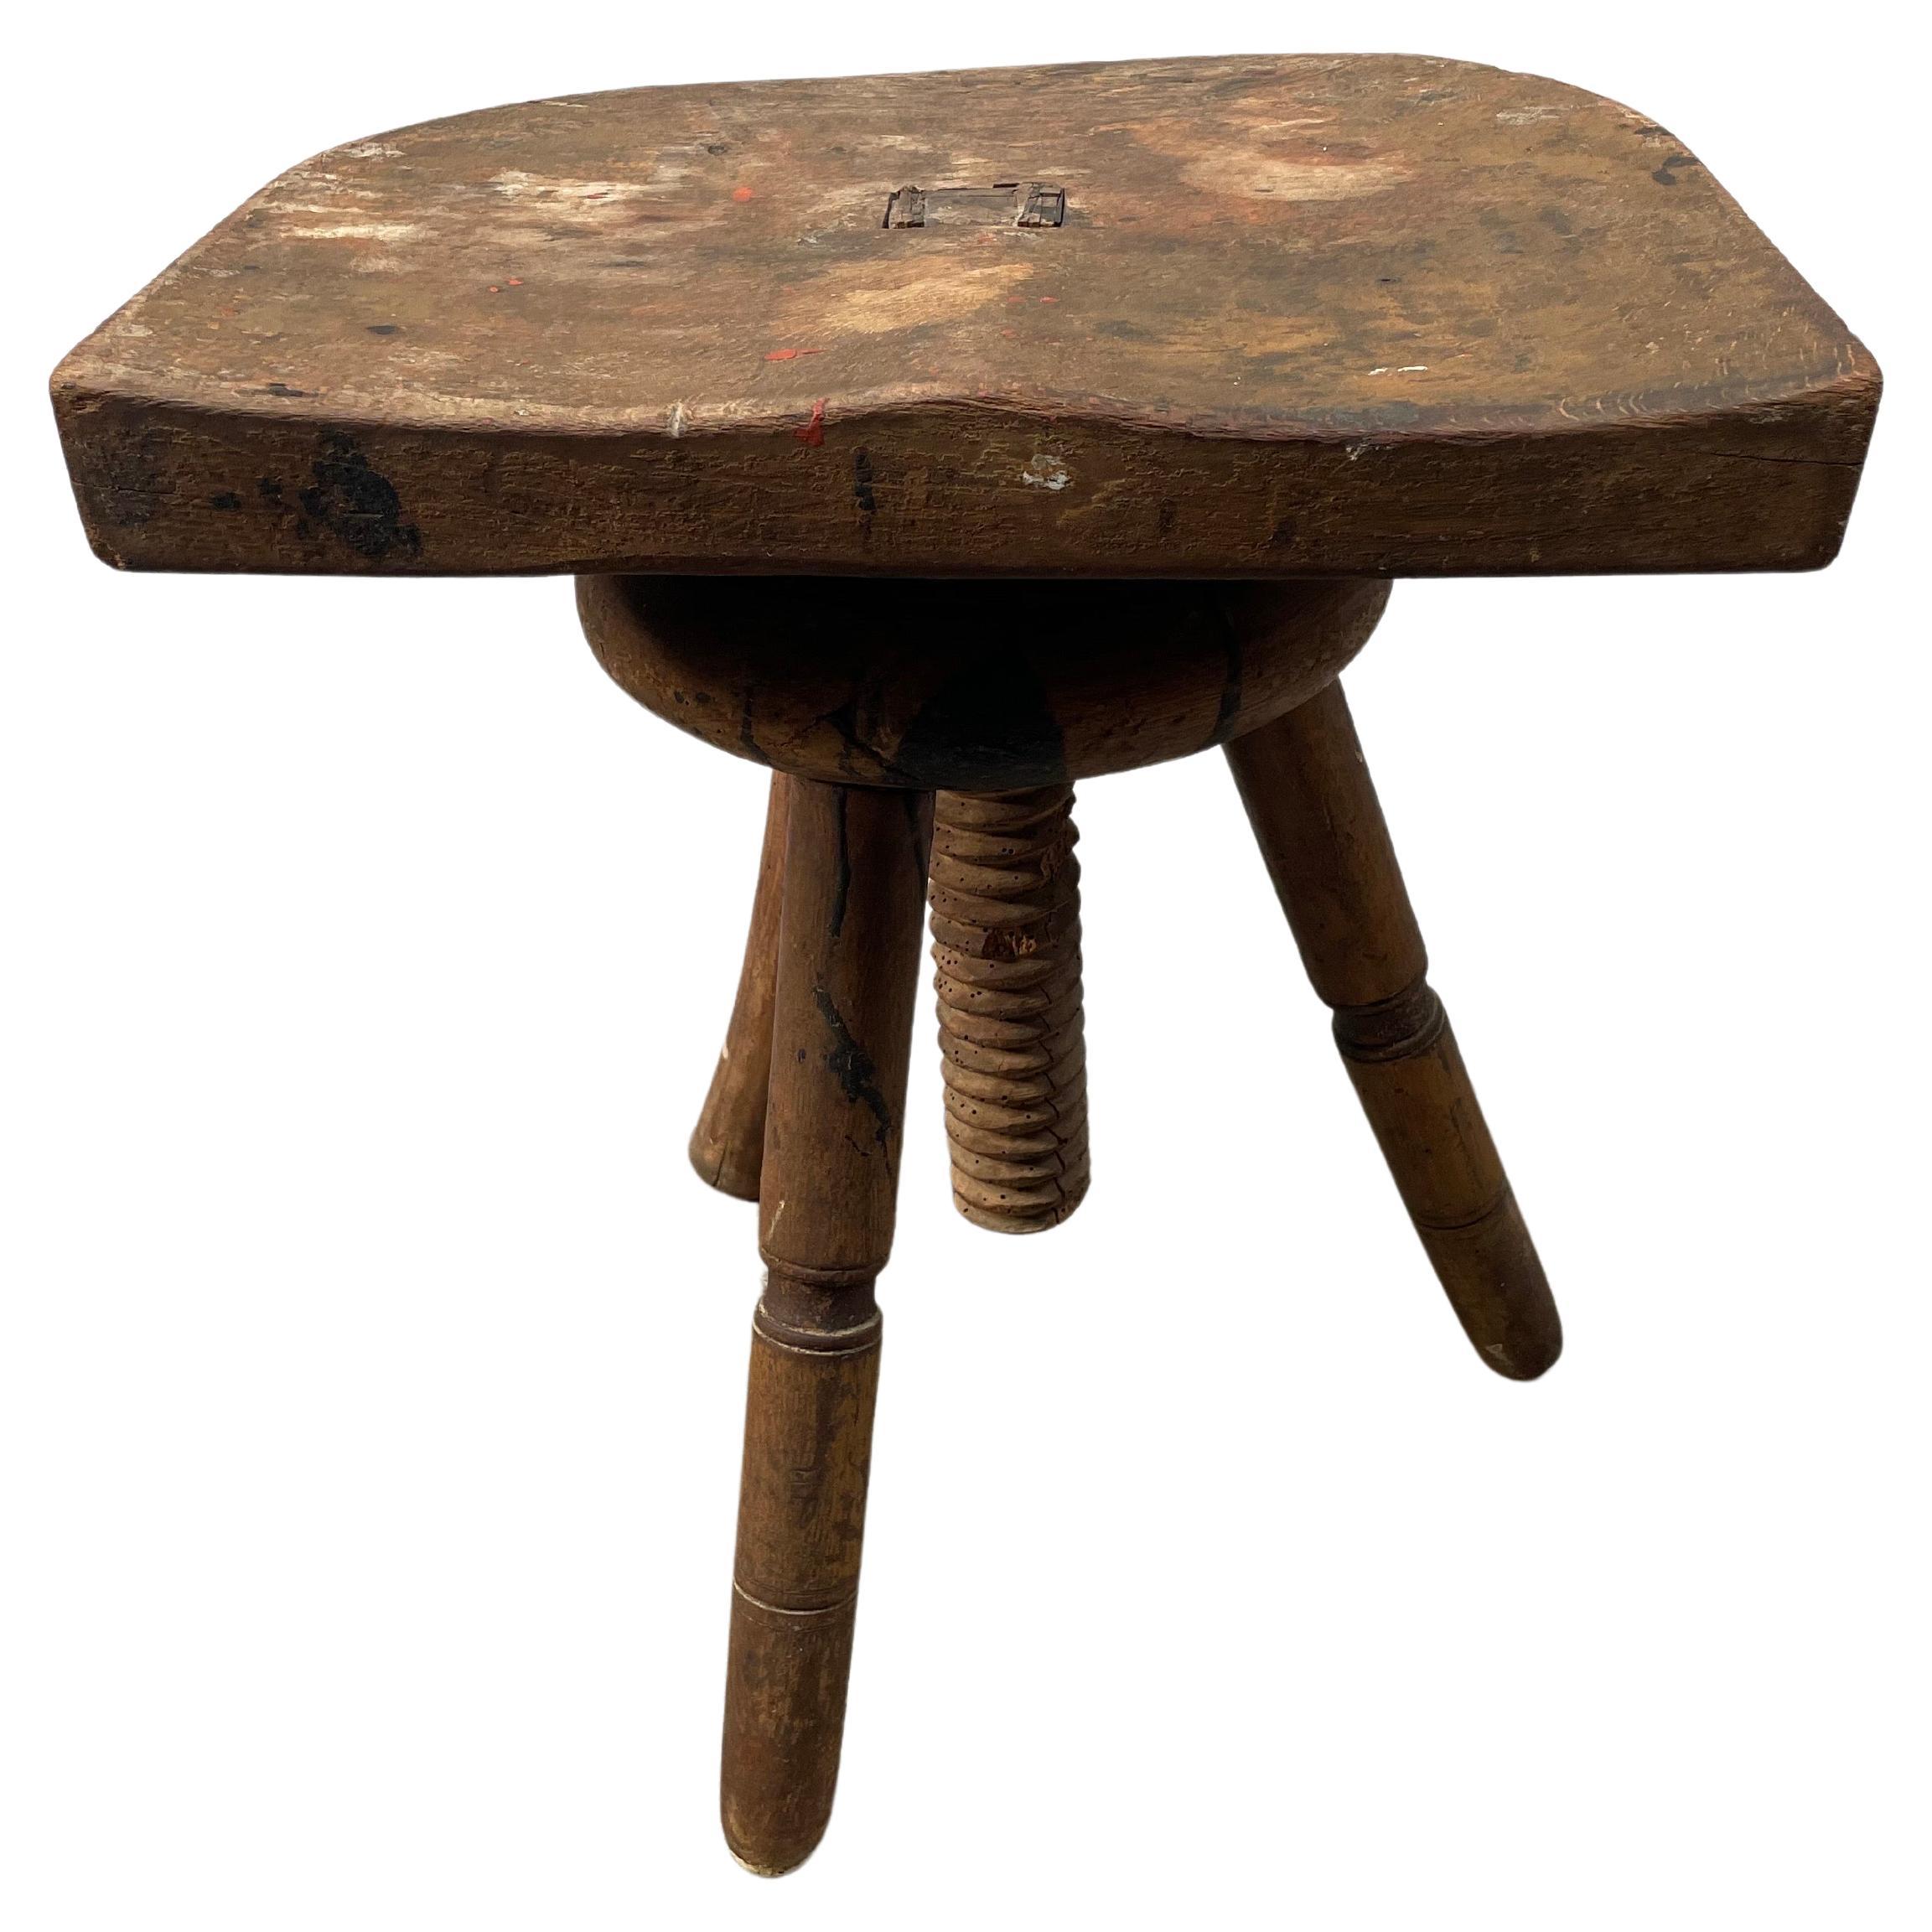 One of a Kind Antique Danish Stool